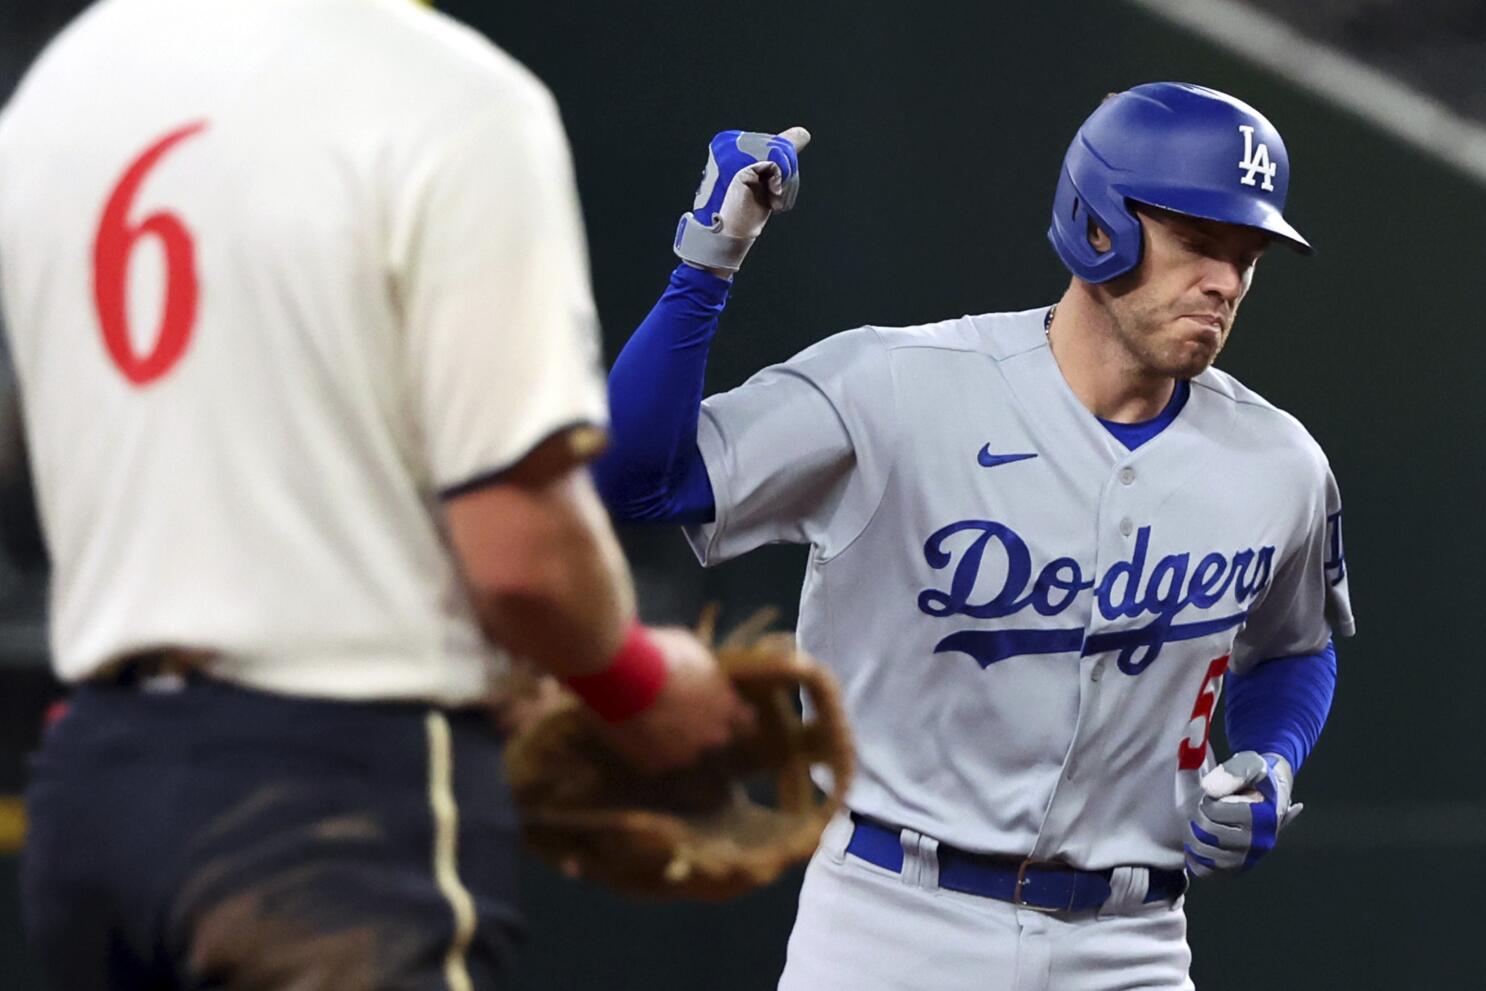 Dodgers make small change to uniforms after more than 20 years as